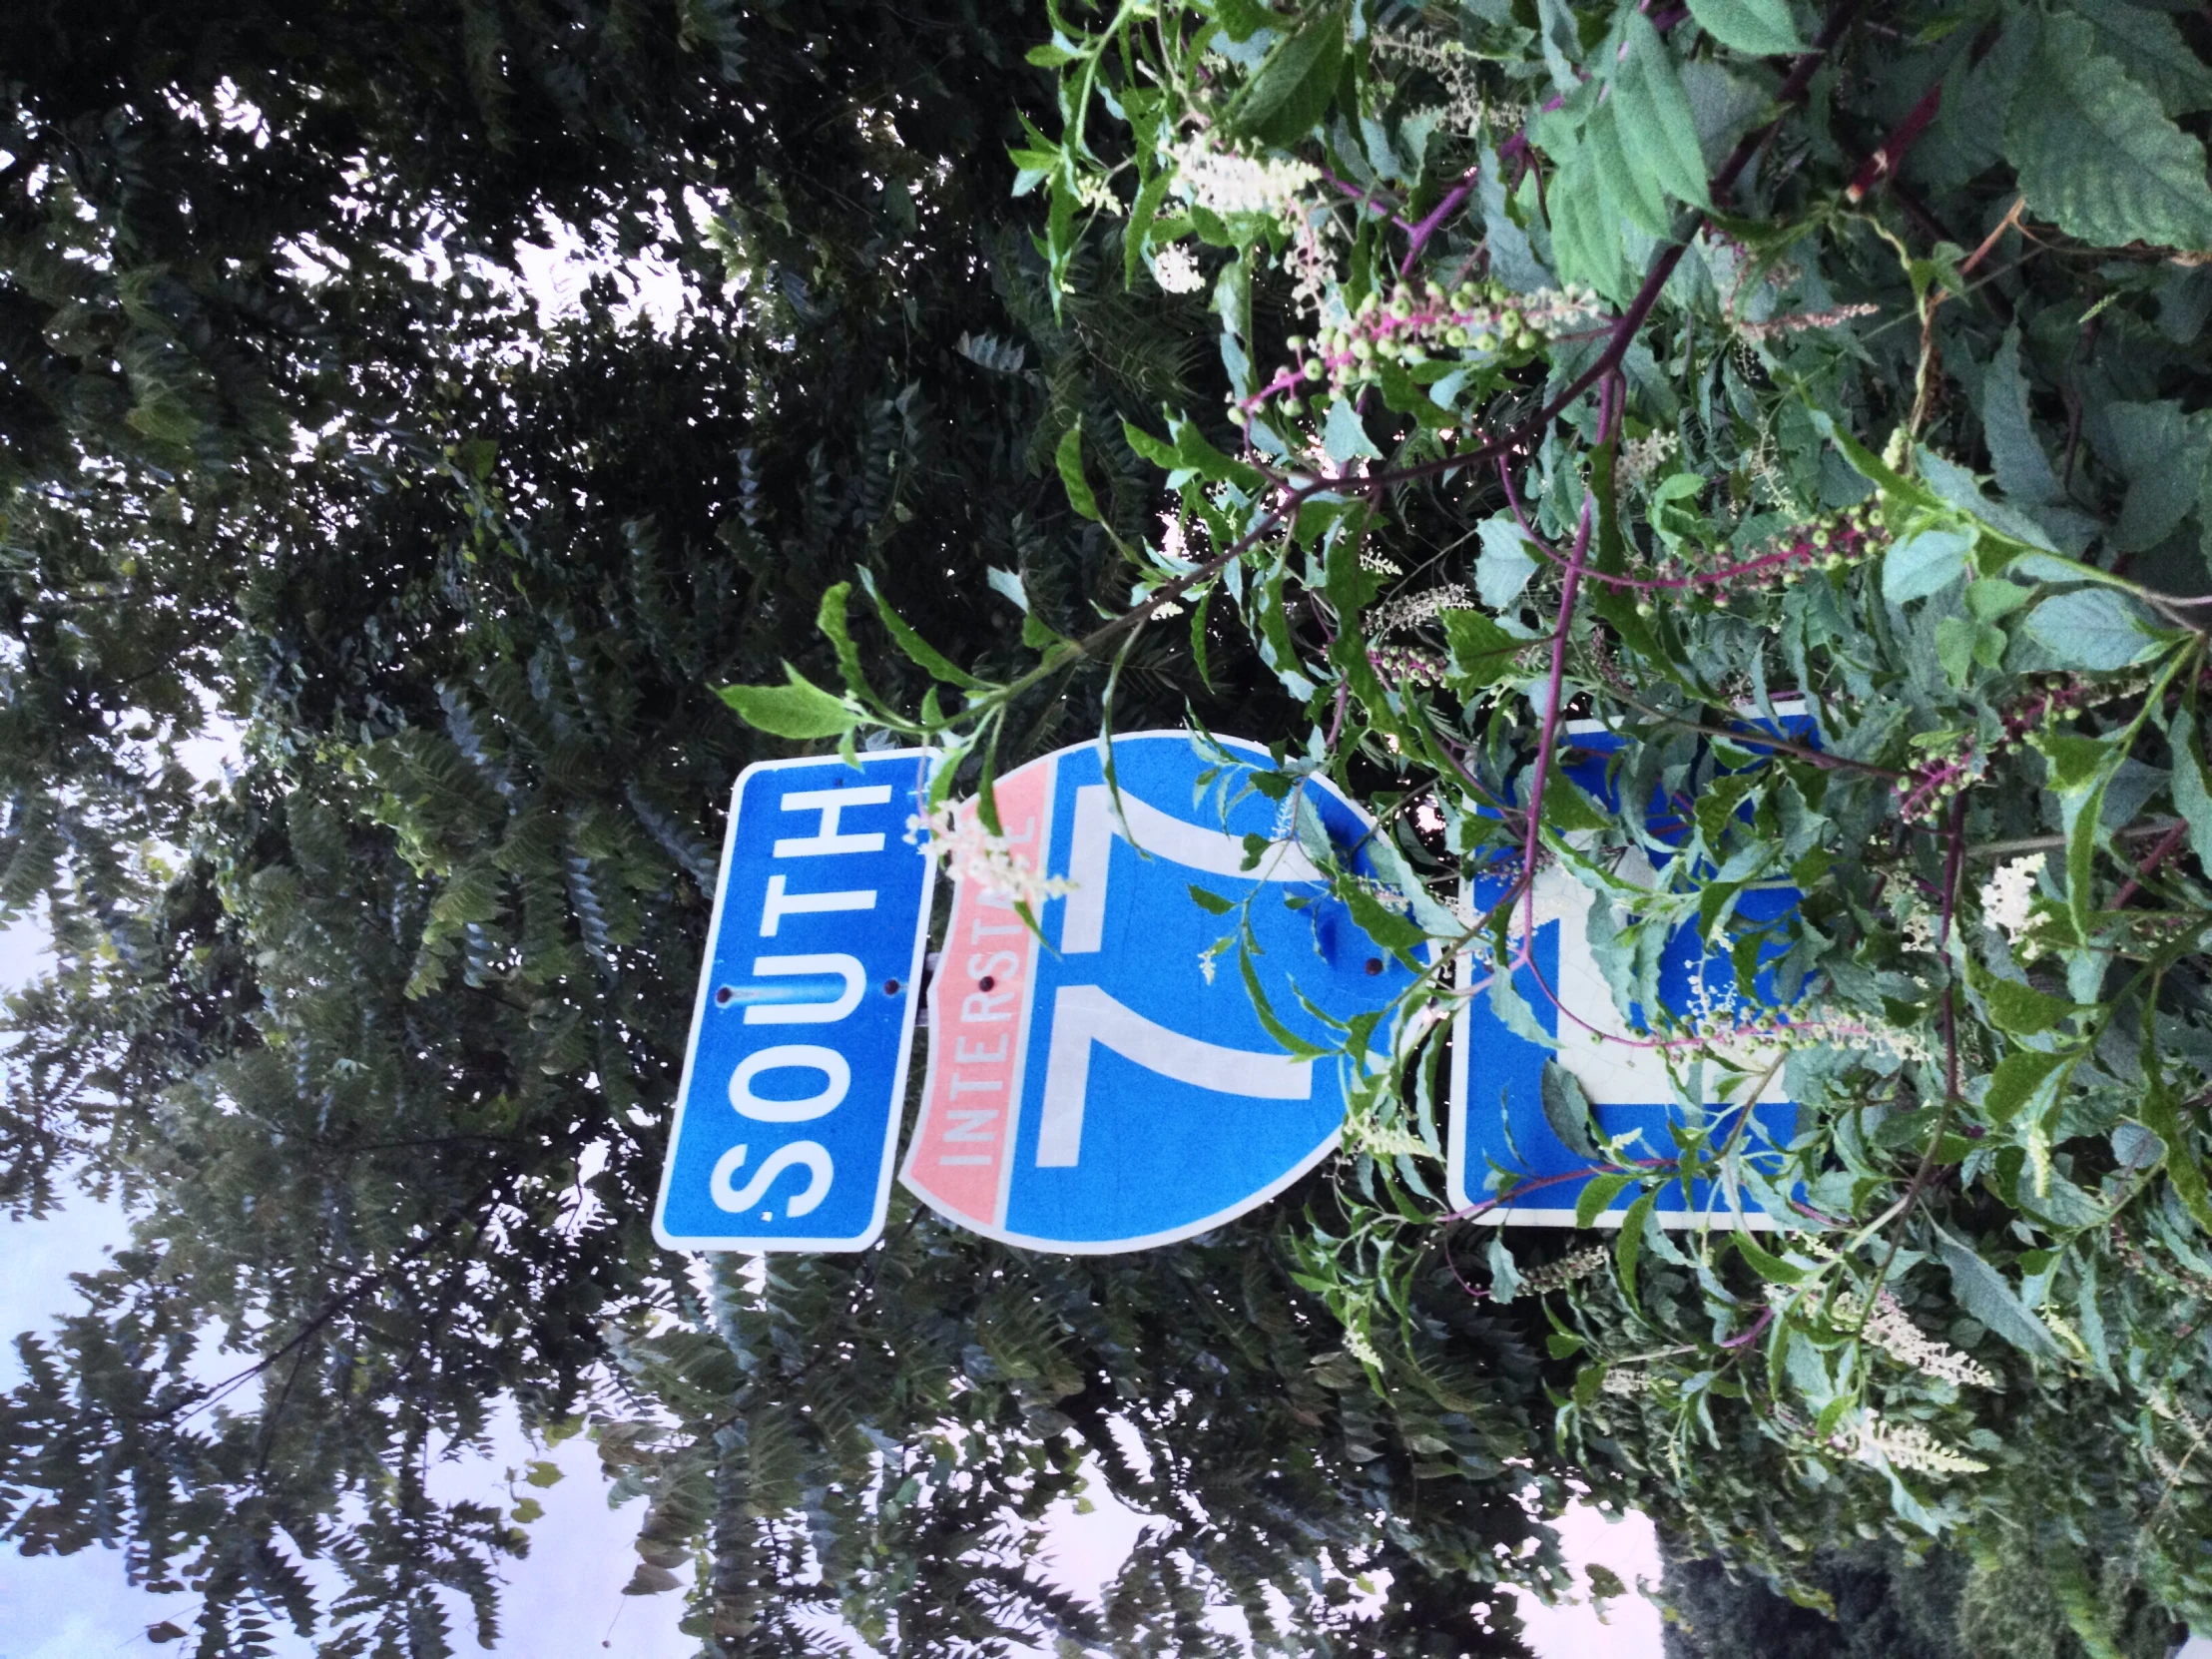 the road sign for south street is clearly visible from a bush